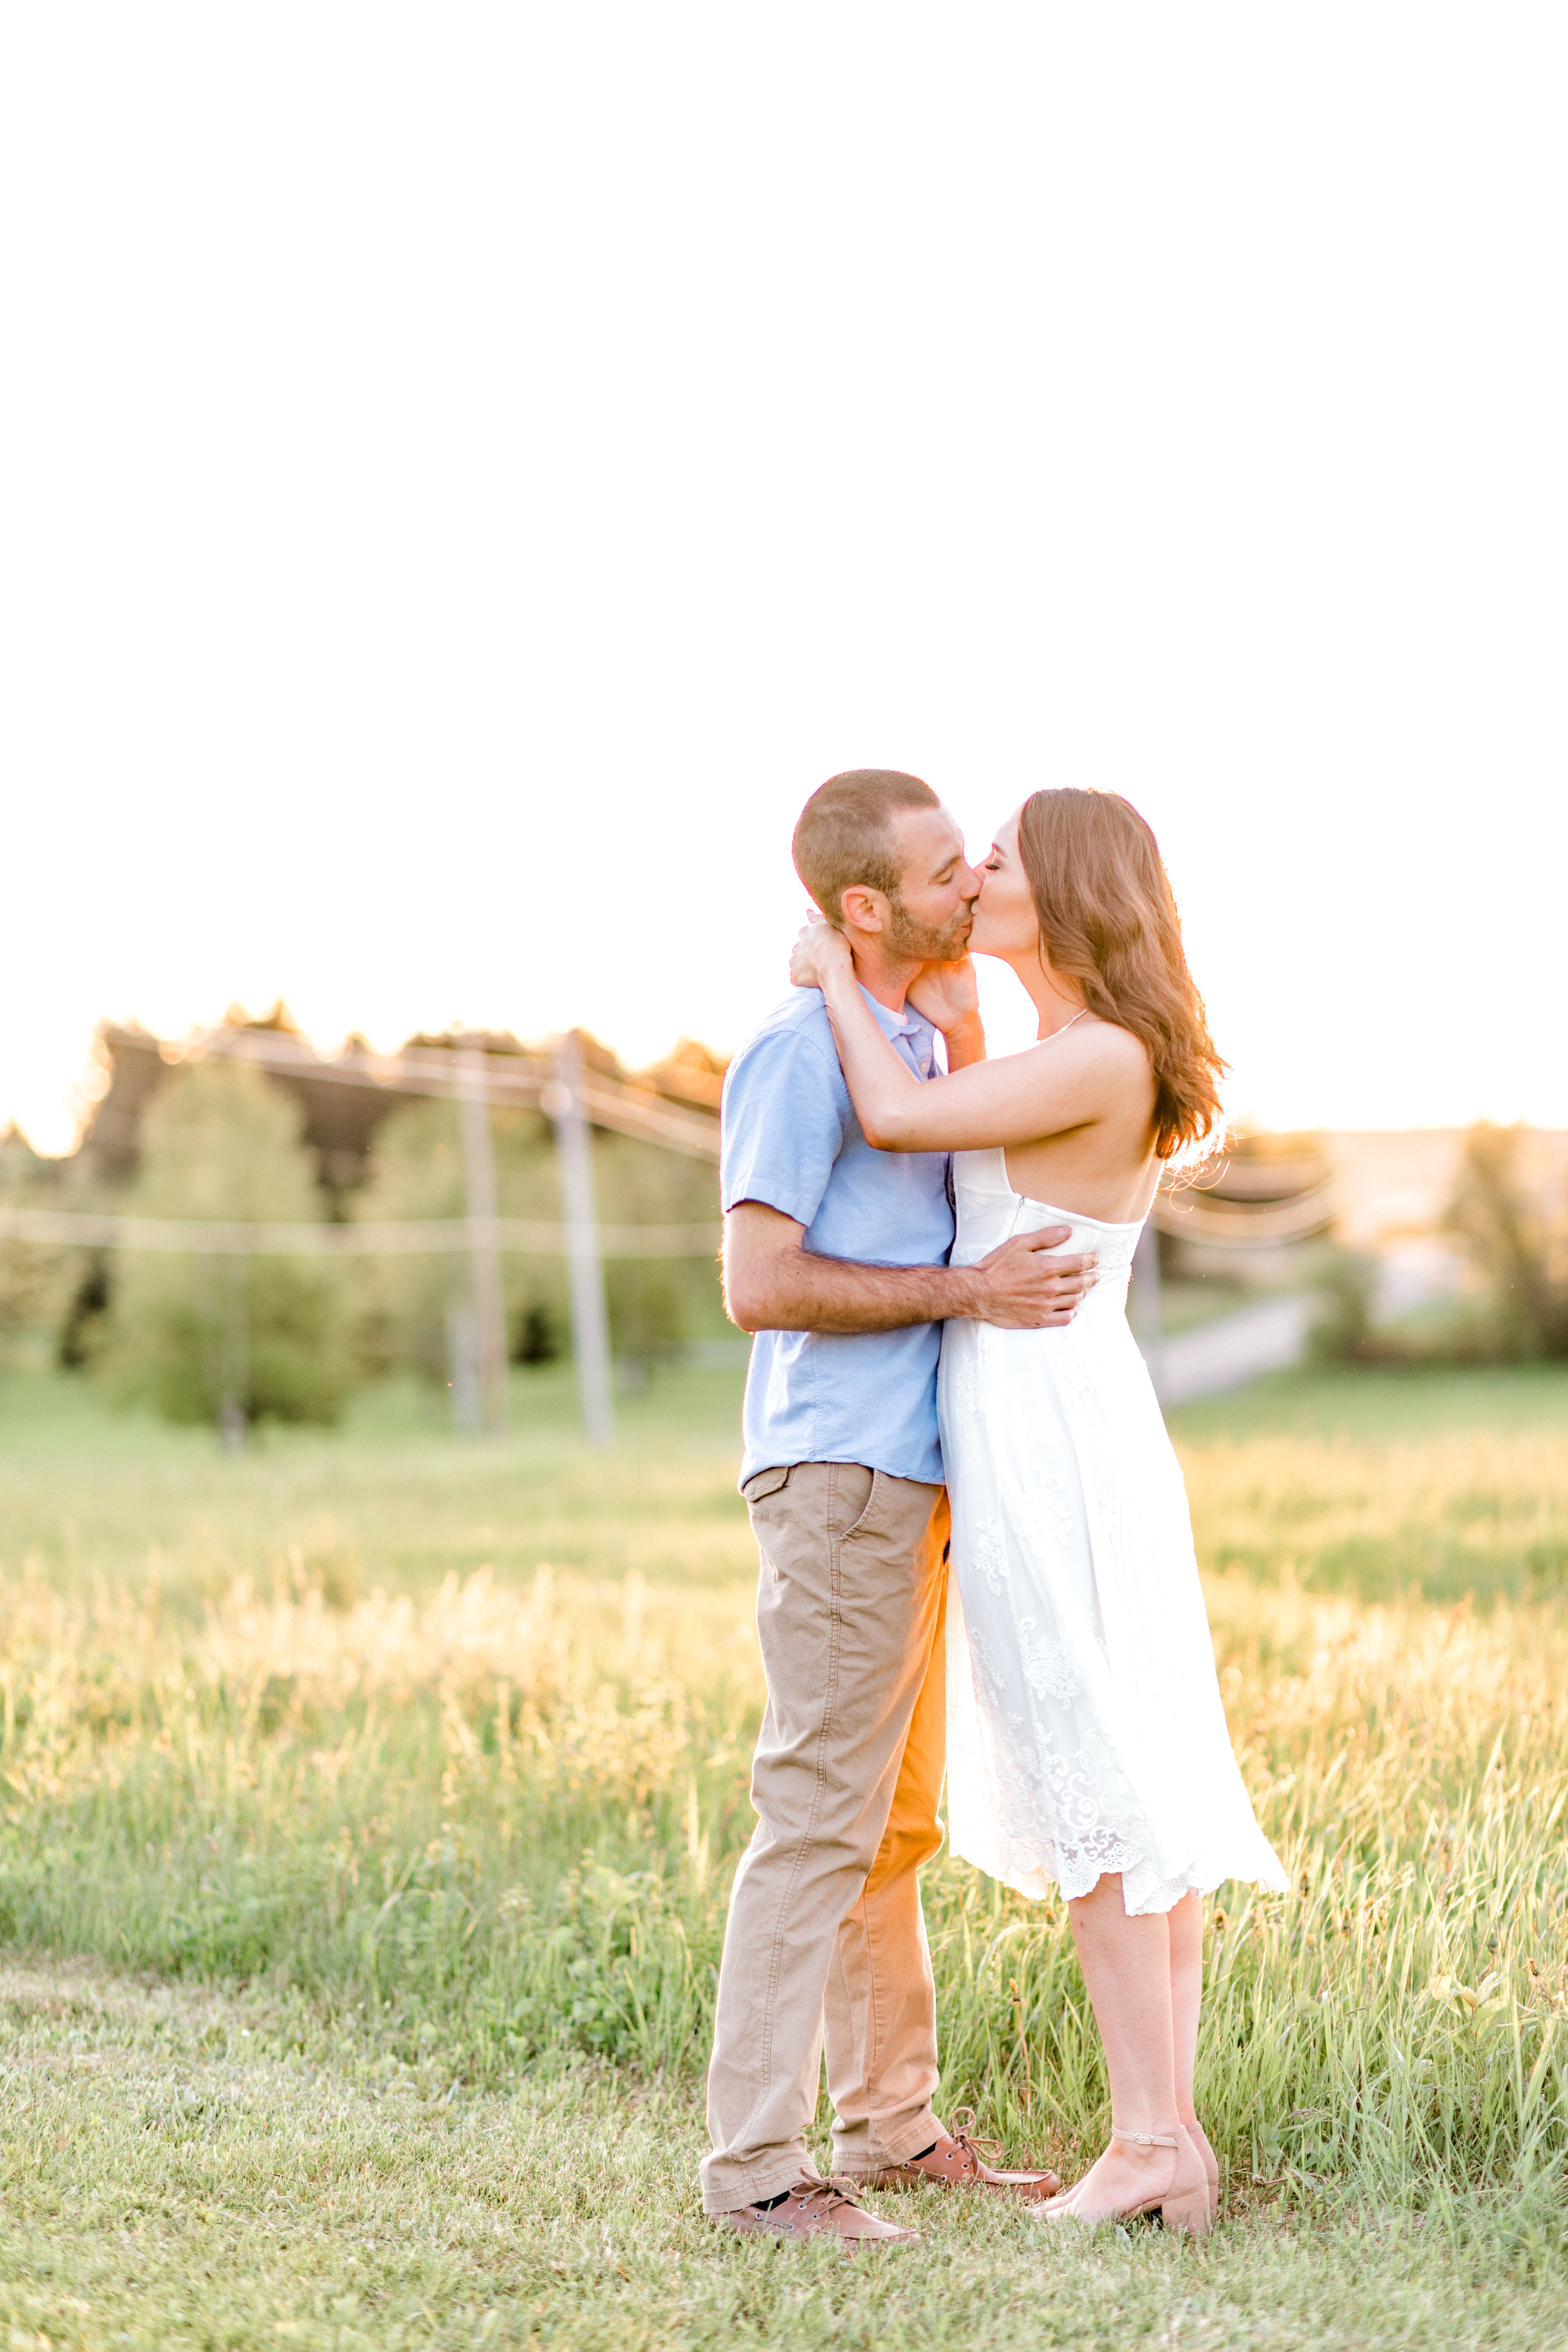 Engagement pictures should be romantic and fun! This golden glow session was jus that. Sunrise orchard engagement photo ideas with flower blossoms. Engagement outfit ideas.